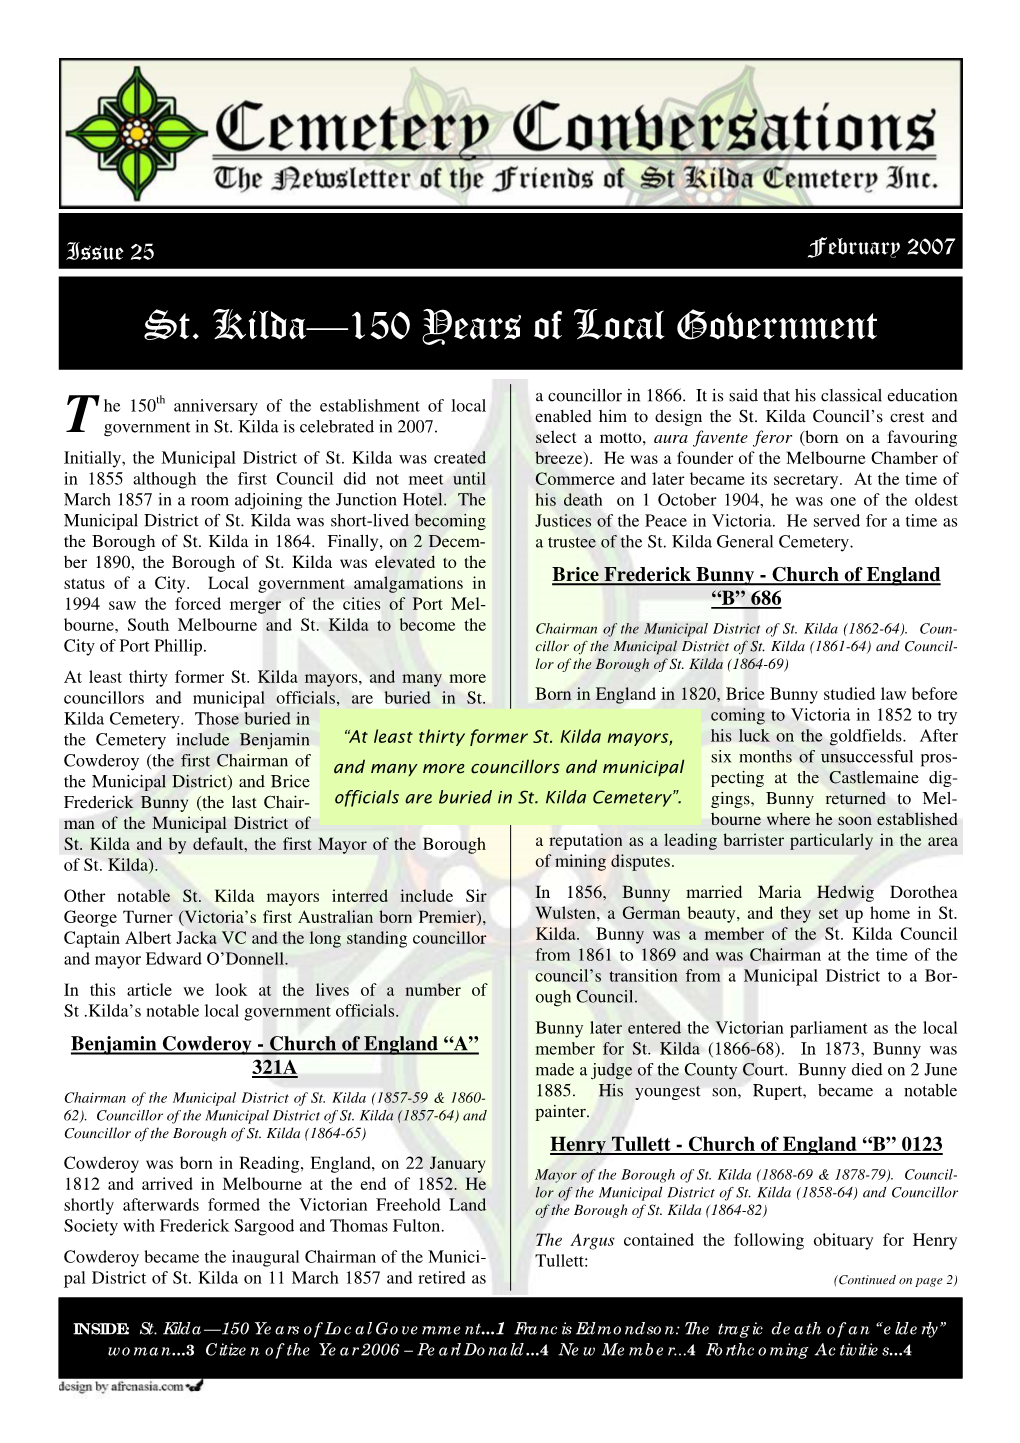 St. Kilda—150 Years of Local Government